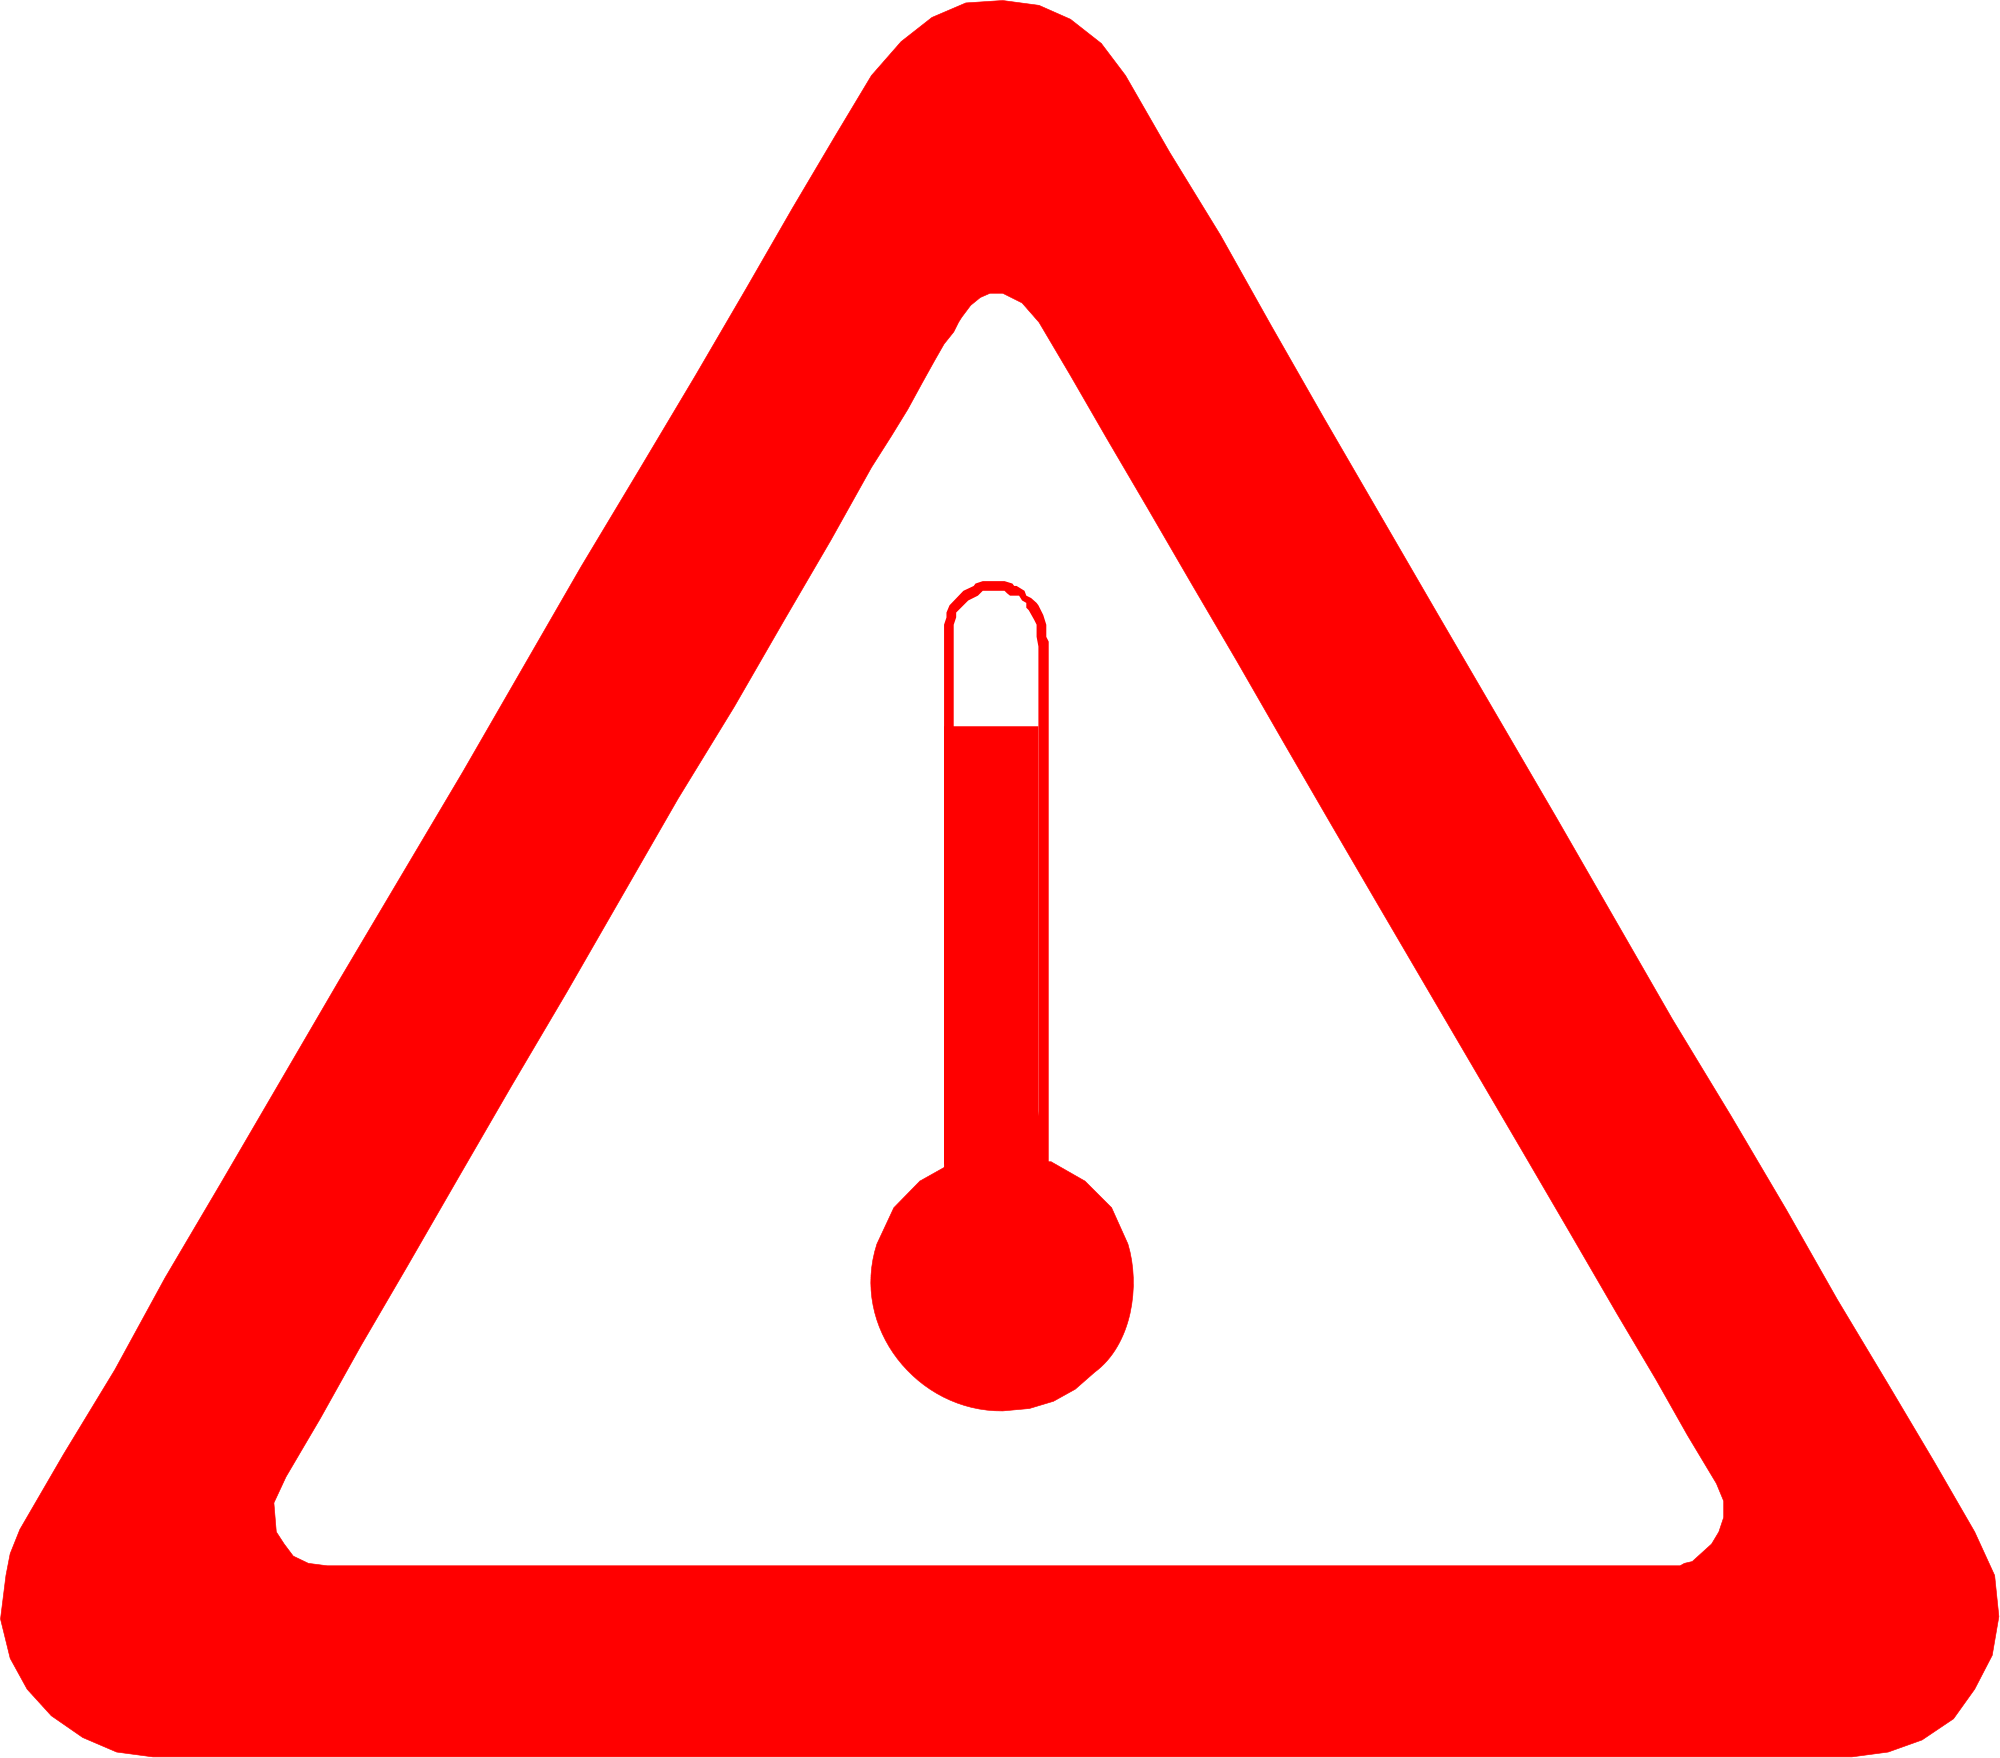 Rising Temperatures Increase The Risk Of Heat-related - Red Triangle Exclamation Mark (2000x1758)